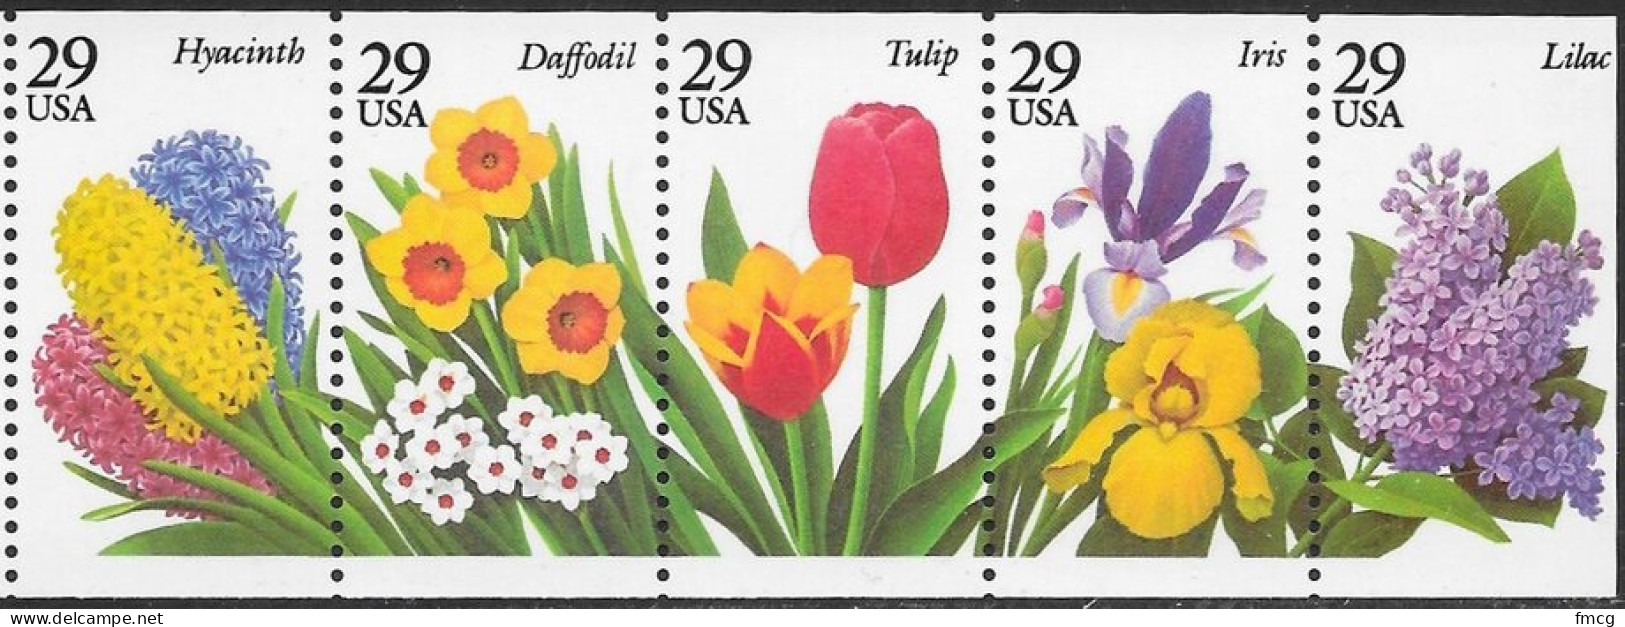 1993 29 Cents Garden Flowers, Booklet Pane Of 5, MNH - Unused Stamps